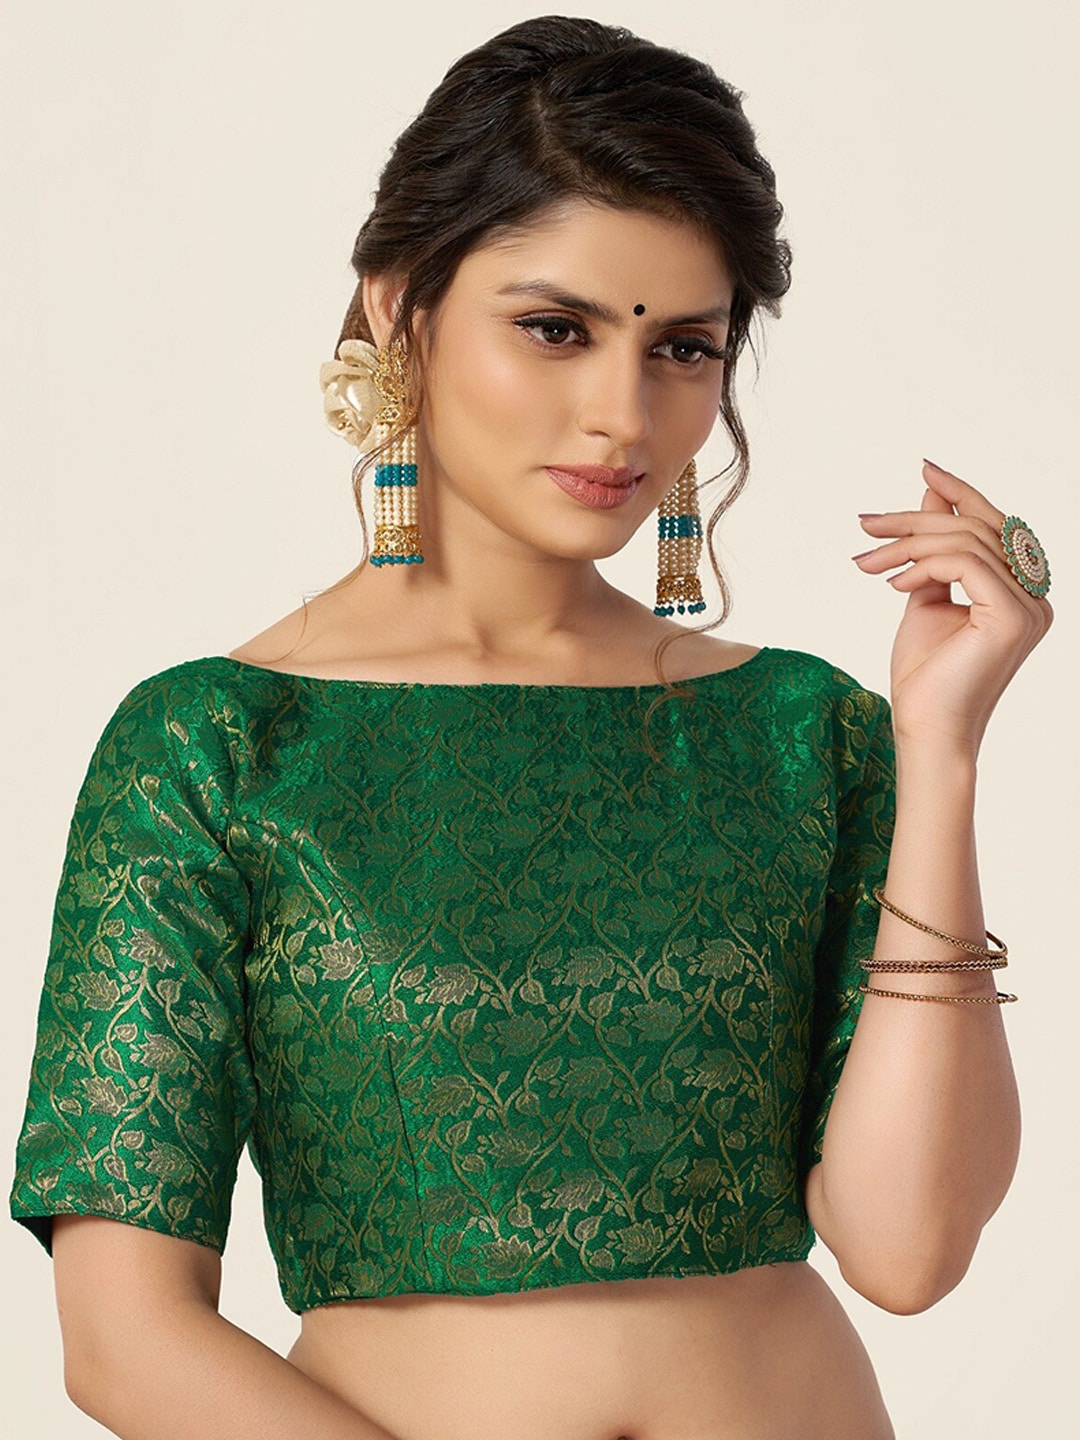 HIMRISE Women Green Woven Design Boat Neck Saree Blouse Price in India